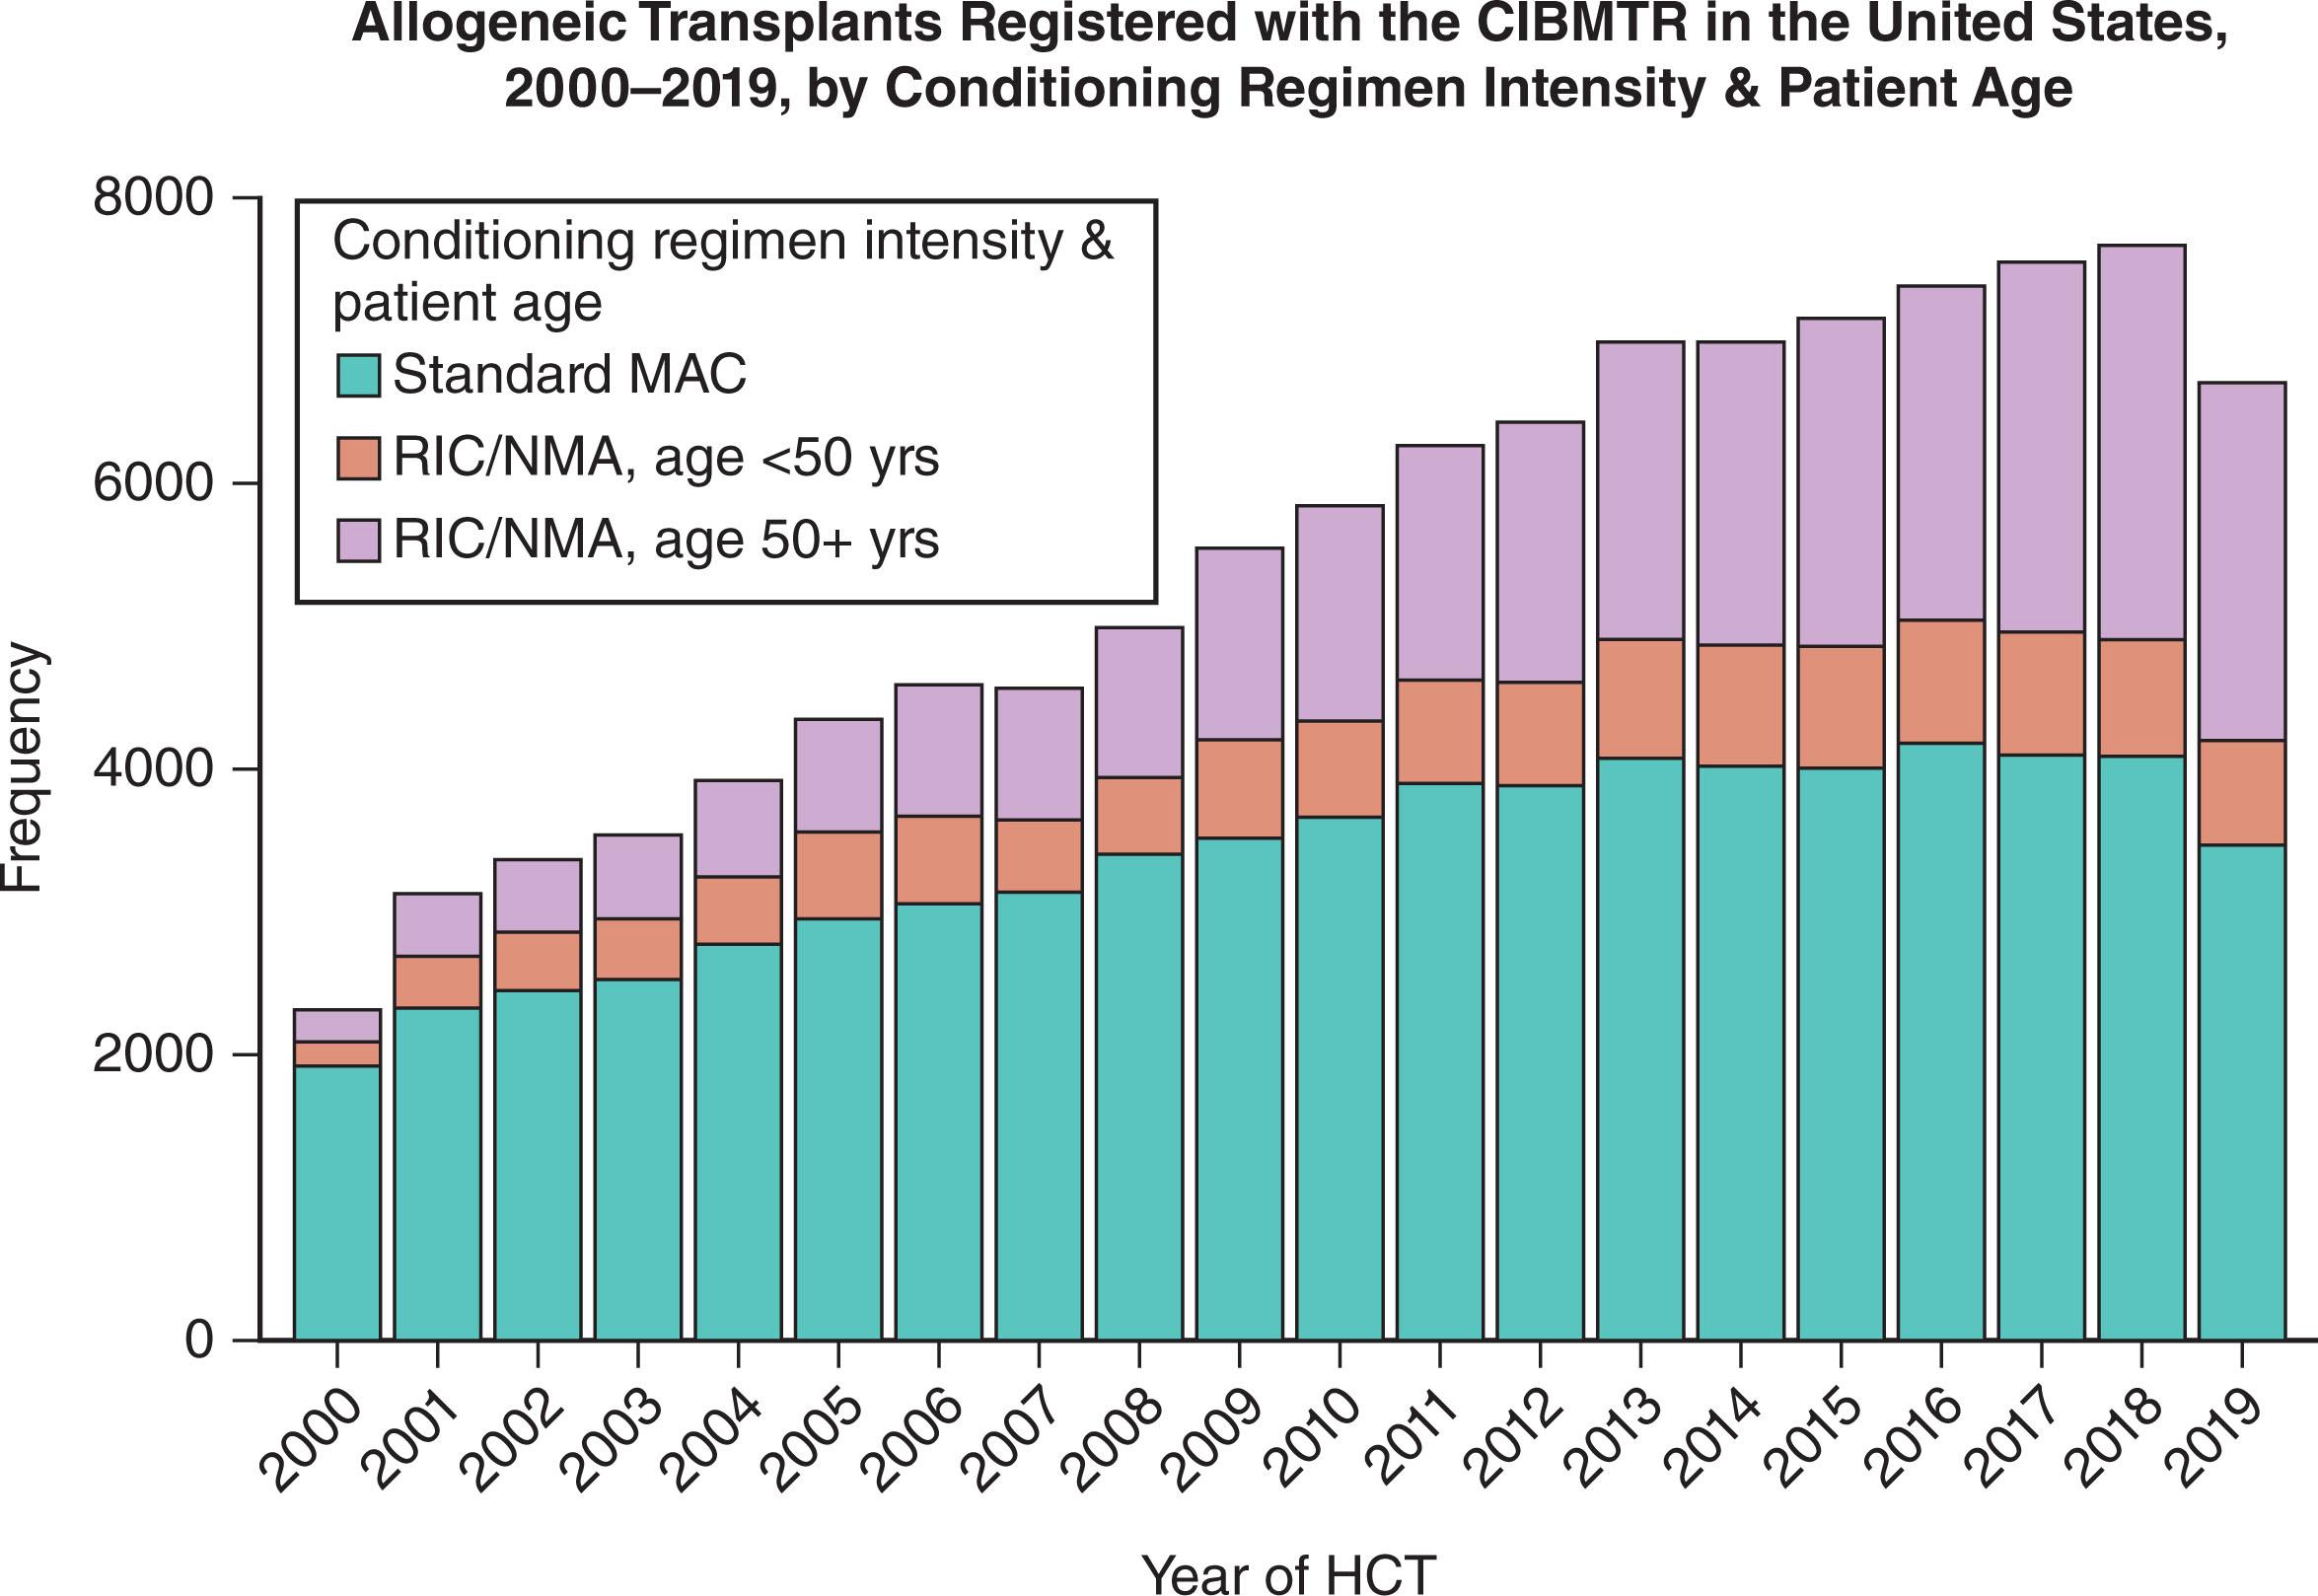 Figure 105.2, CONDITIONING REGIMEN INTENSITY AND PATIENT AGE: CHANGING TREND OVER TIME (2000–2019).